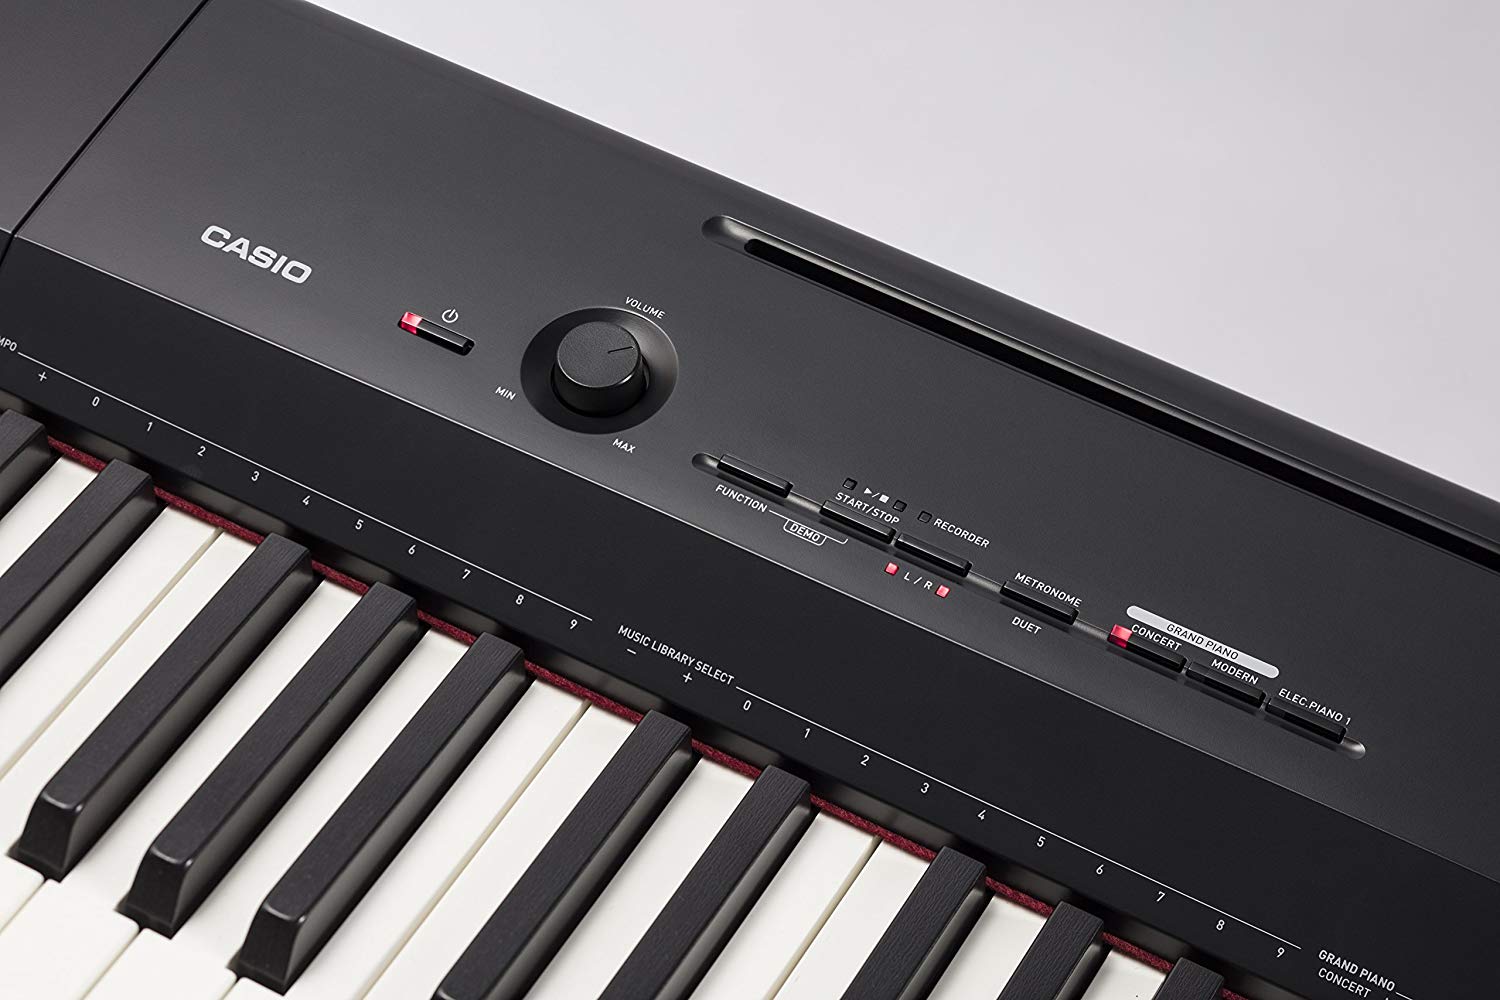 Review: Casio Privia PX-160 – Well-known Digital Piano